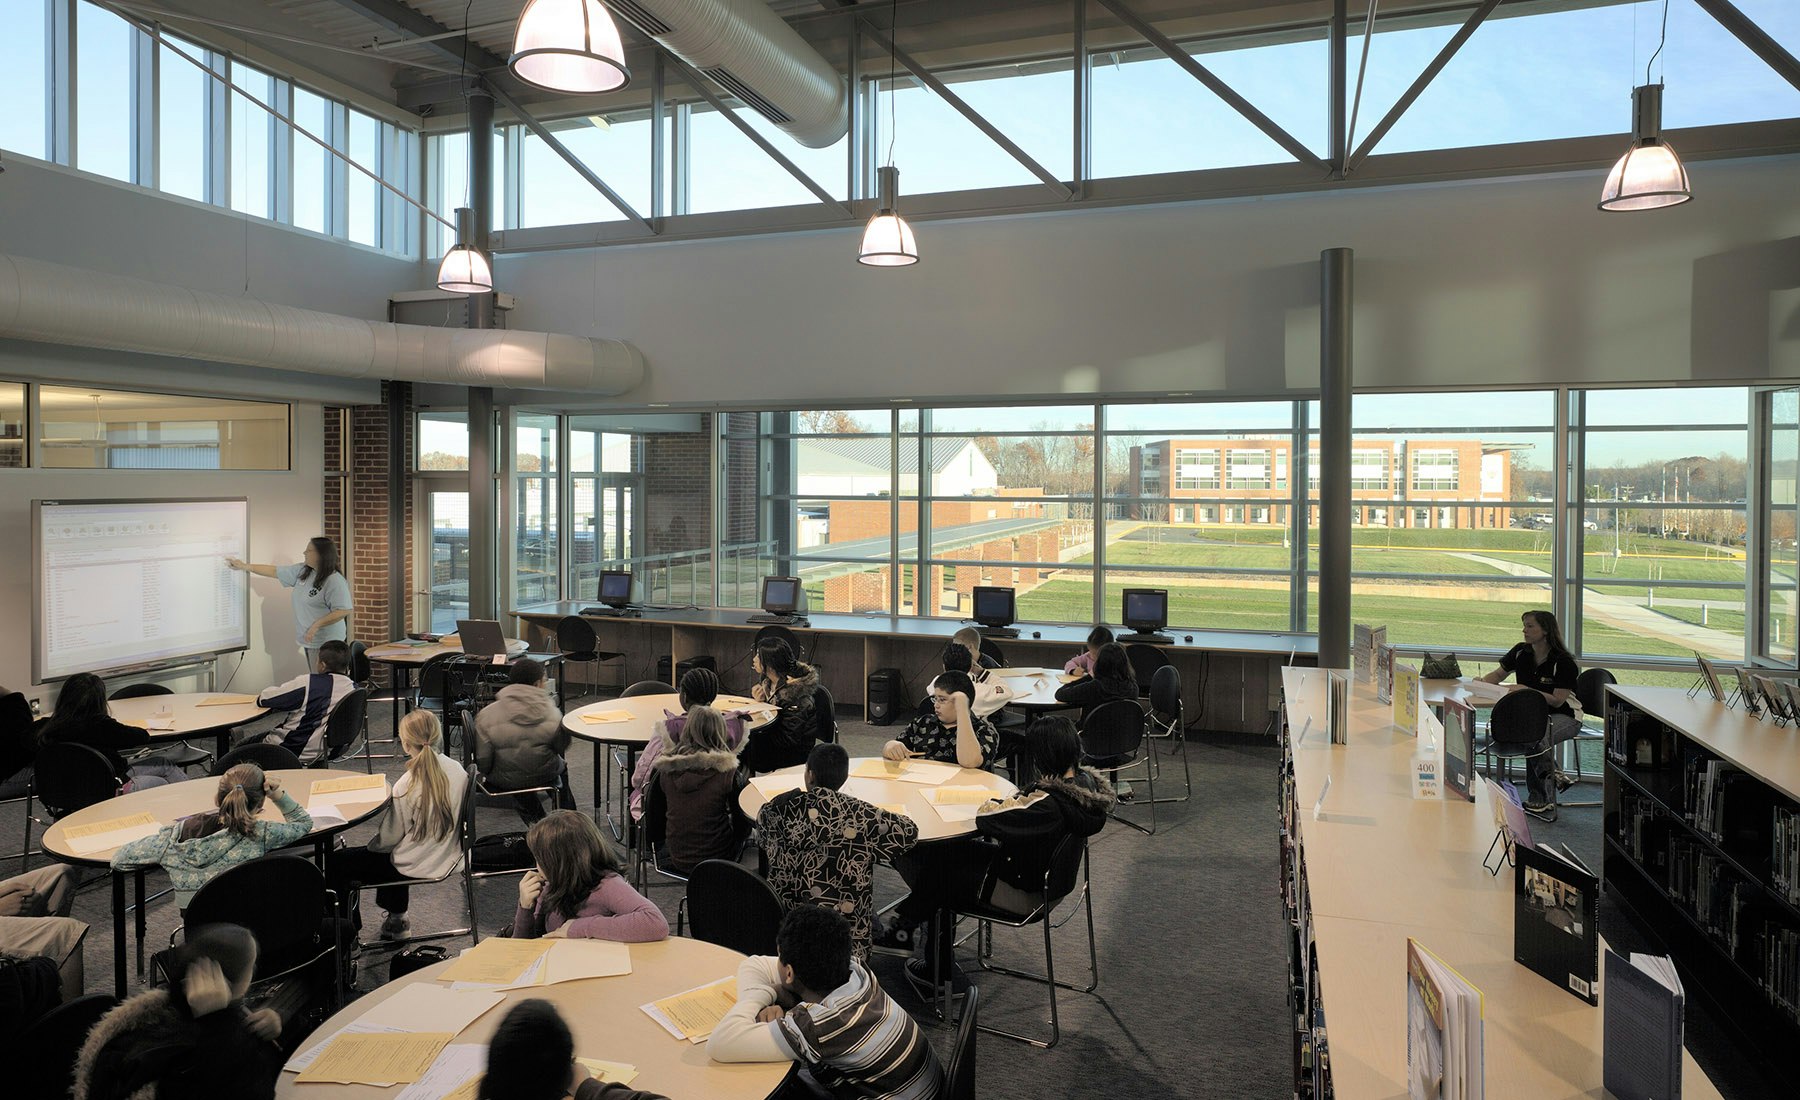 It adheres to an existing master plan that called for the new school to frame a public lawn on a shared middle / high school campus. The middle school had to remain operational throughout construction, so the project was completed in four phases. 